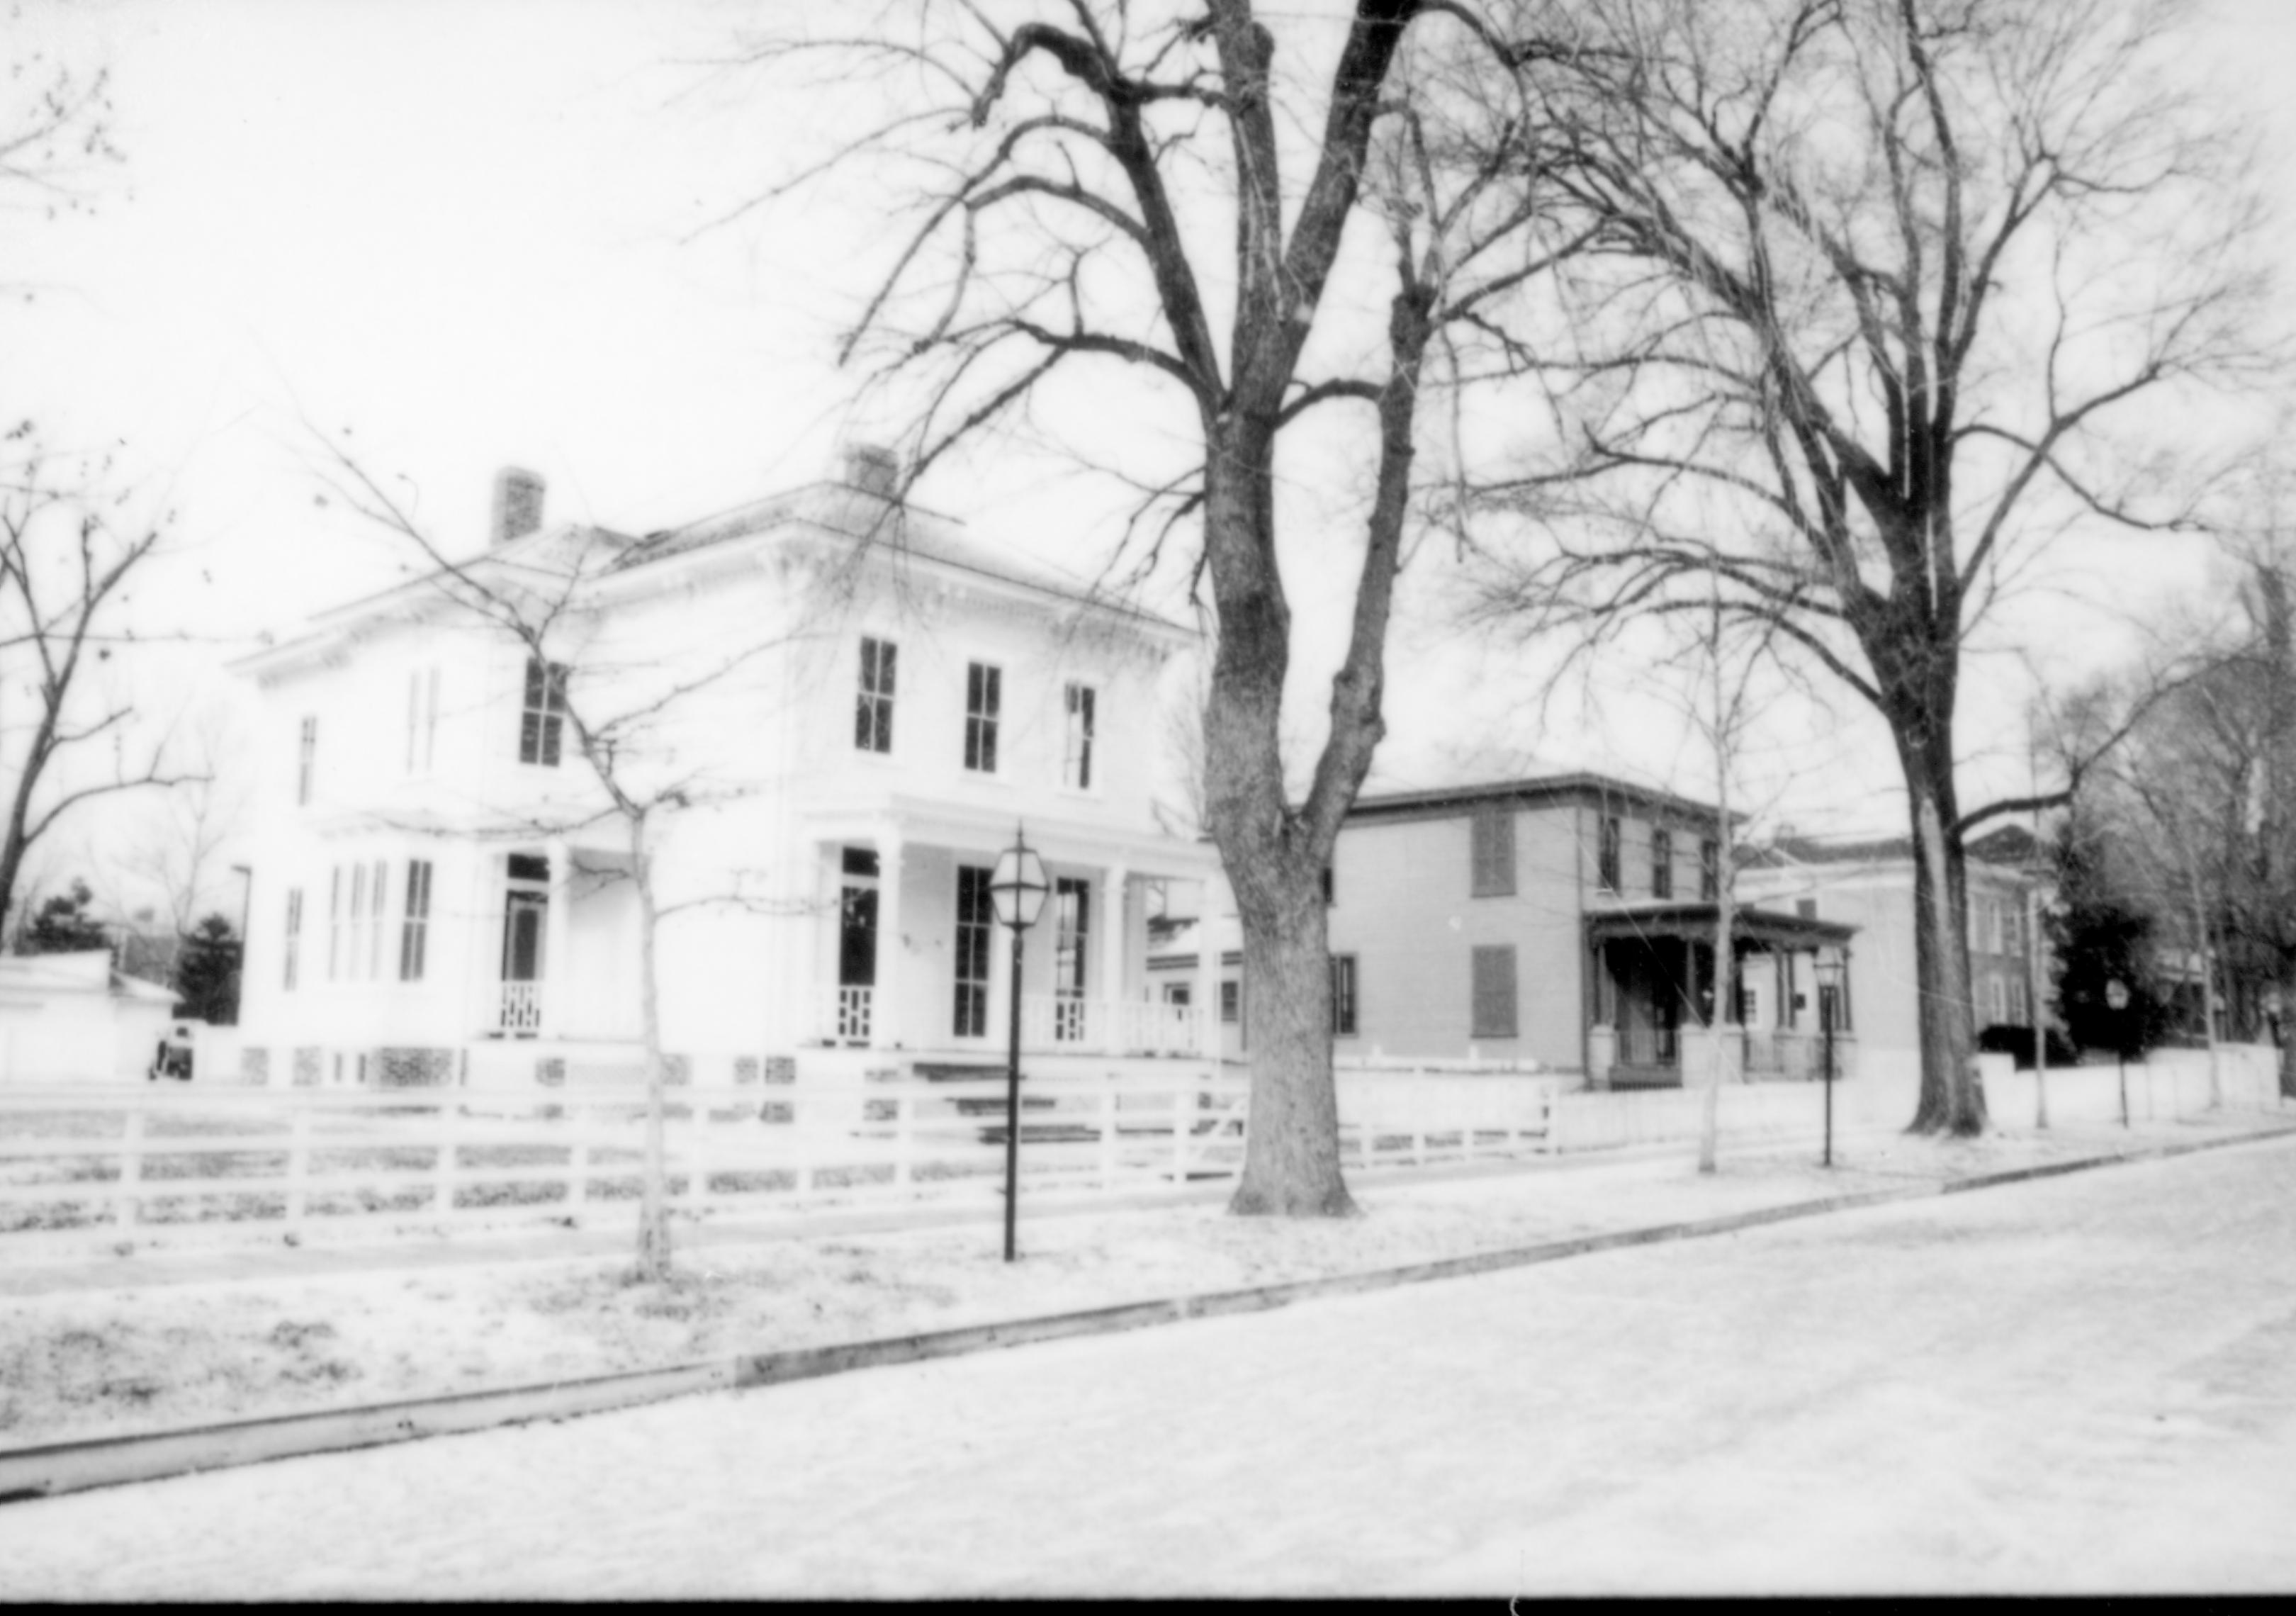 NA Lincoln Home NHS- Various locations, Buildings in Park, 102 neighborhood, historical